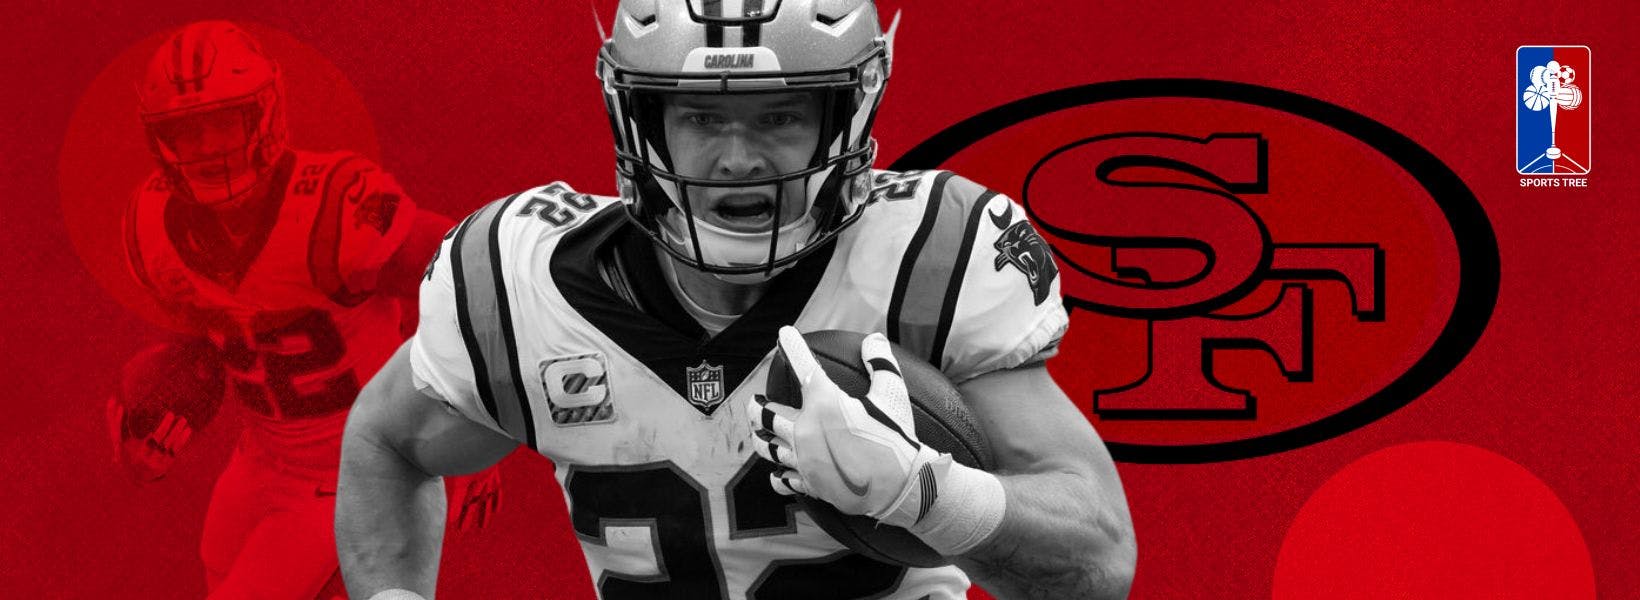 San Francisco 49ers acquire Christian McCaffrey from the Carolina Panthers